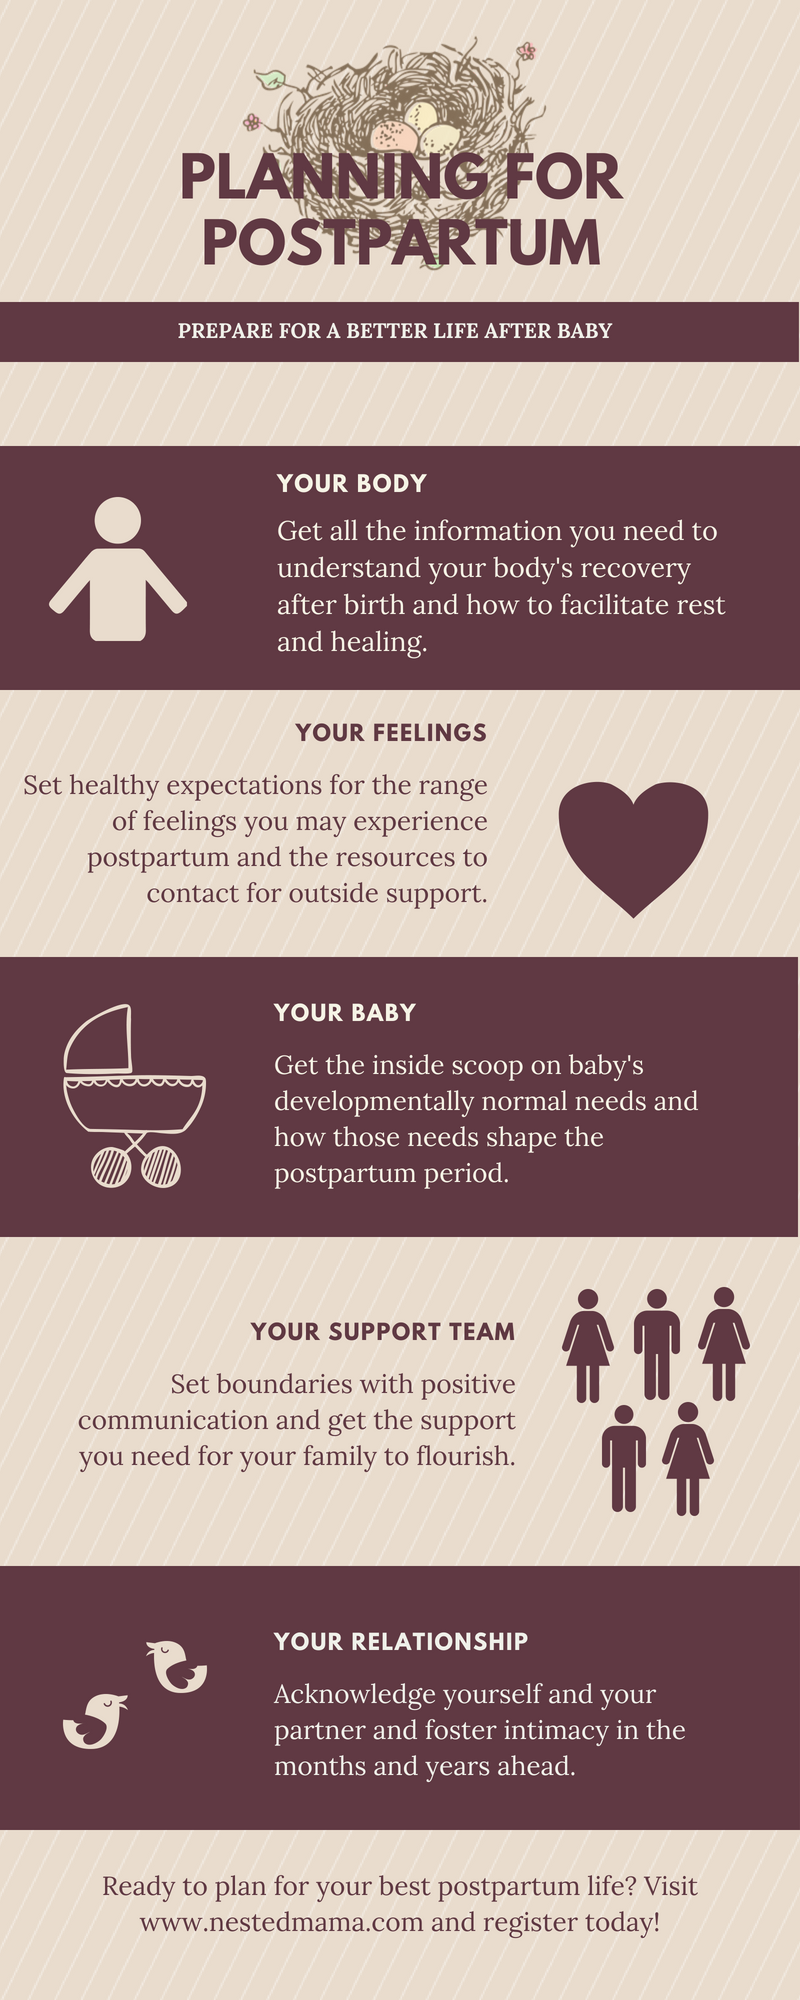 Nested Mama Prenatal & Postpartum Doula Support - blog centering on  pregnancy, birth, postpartum, and parenting. - Nested Mama